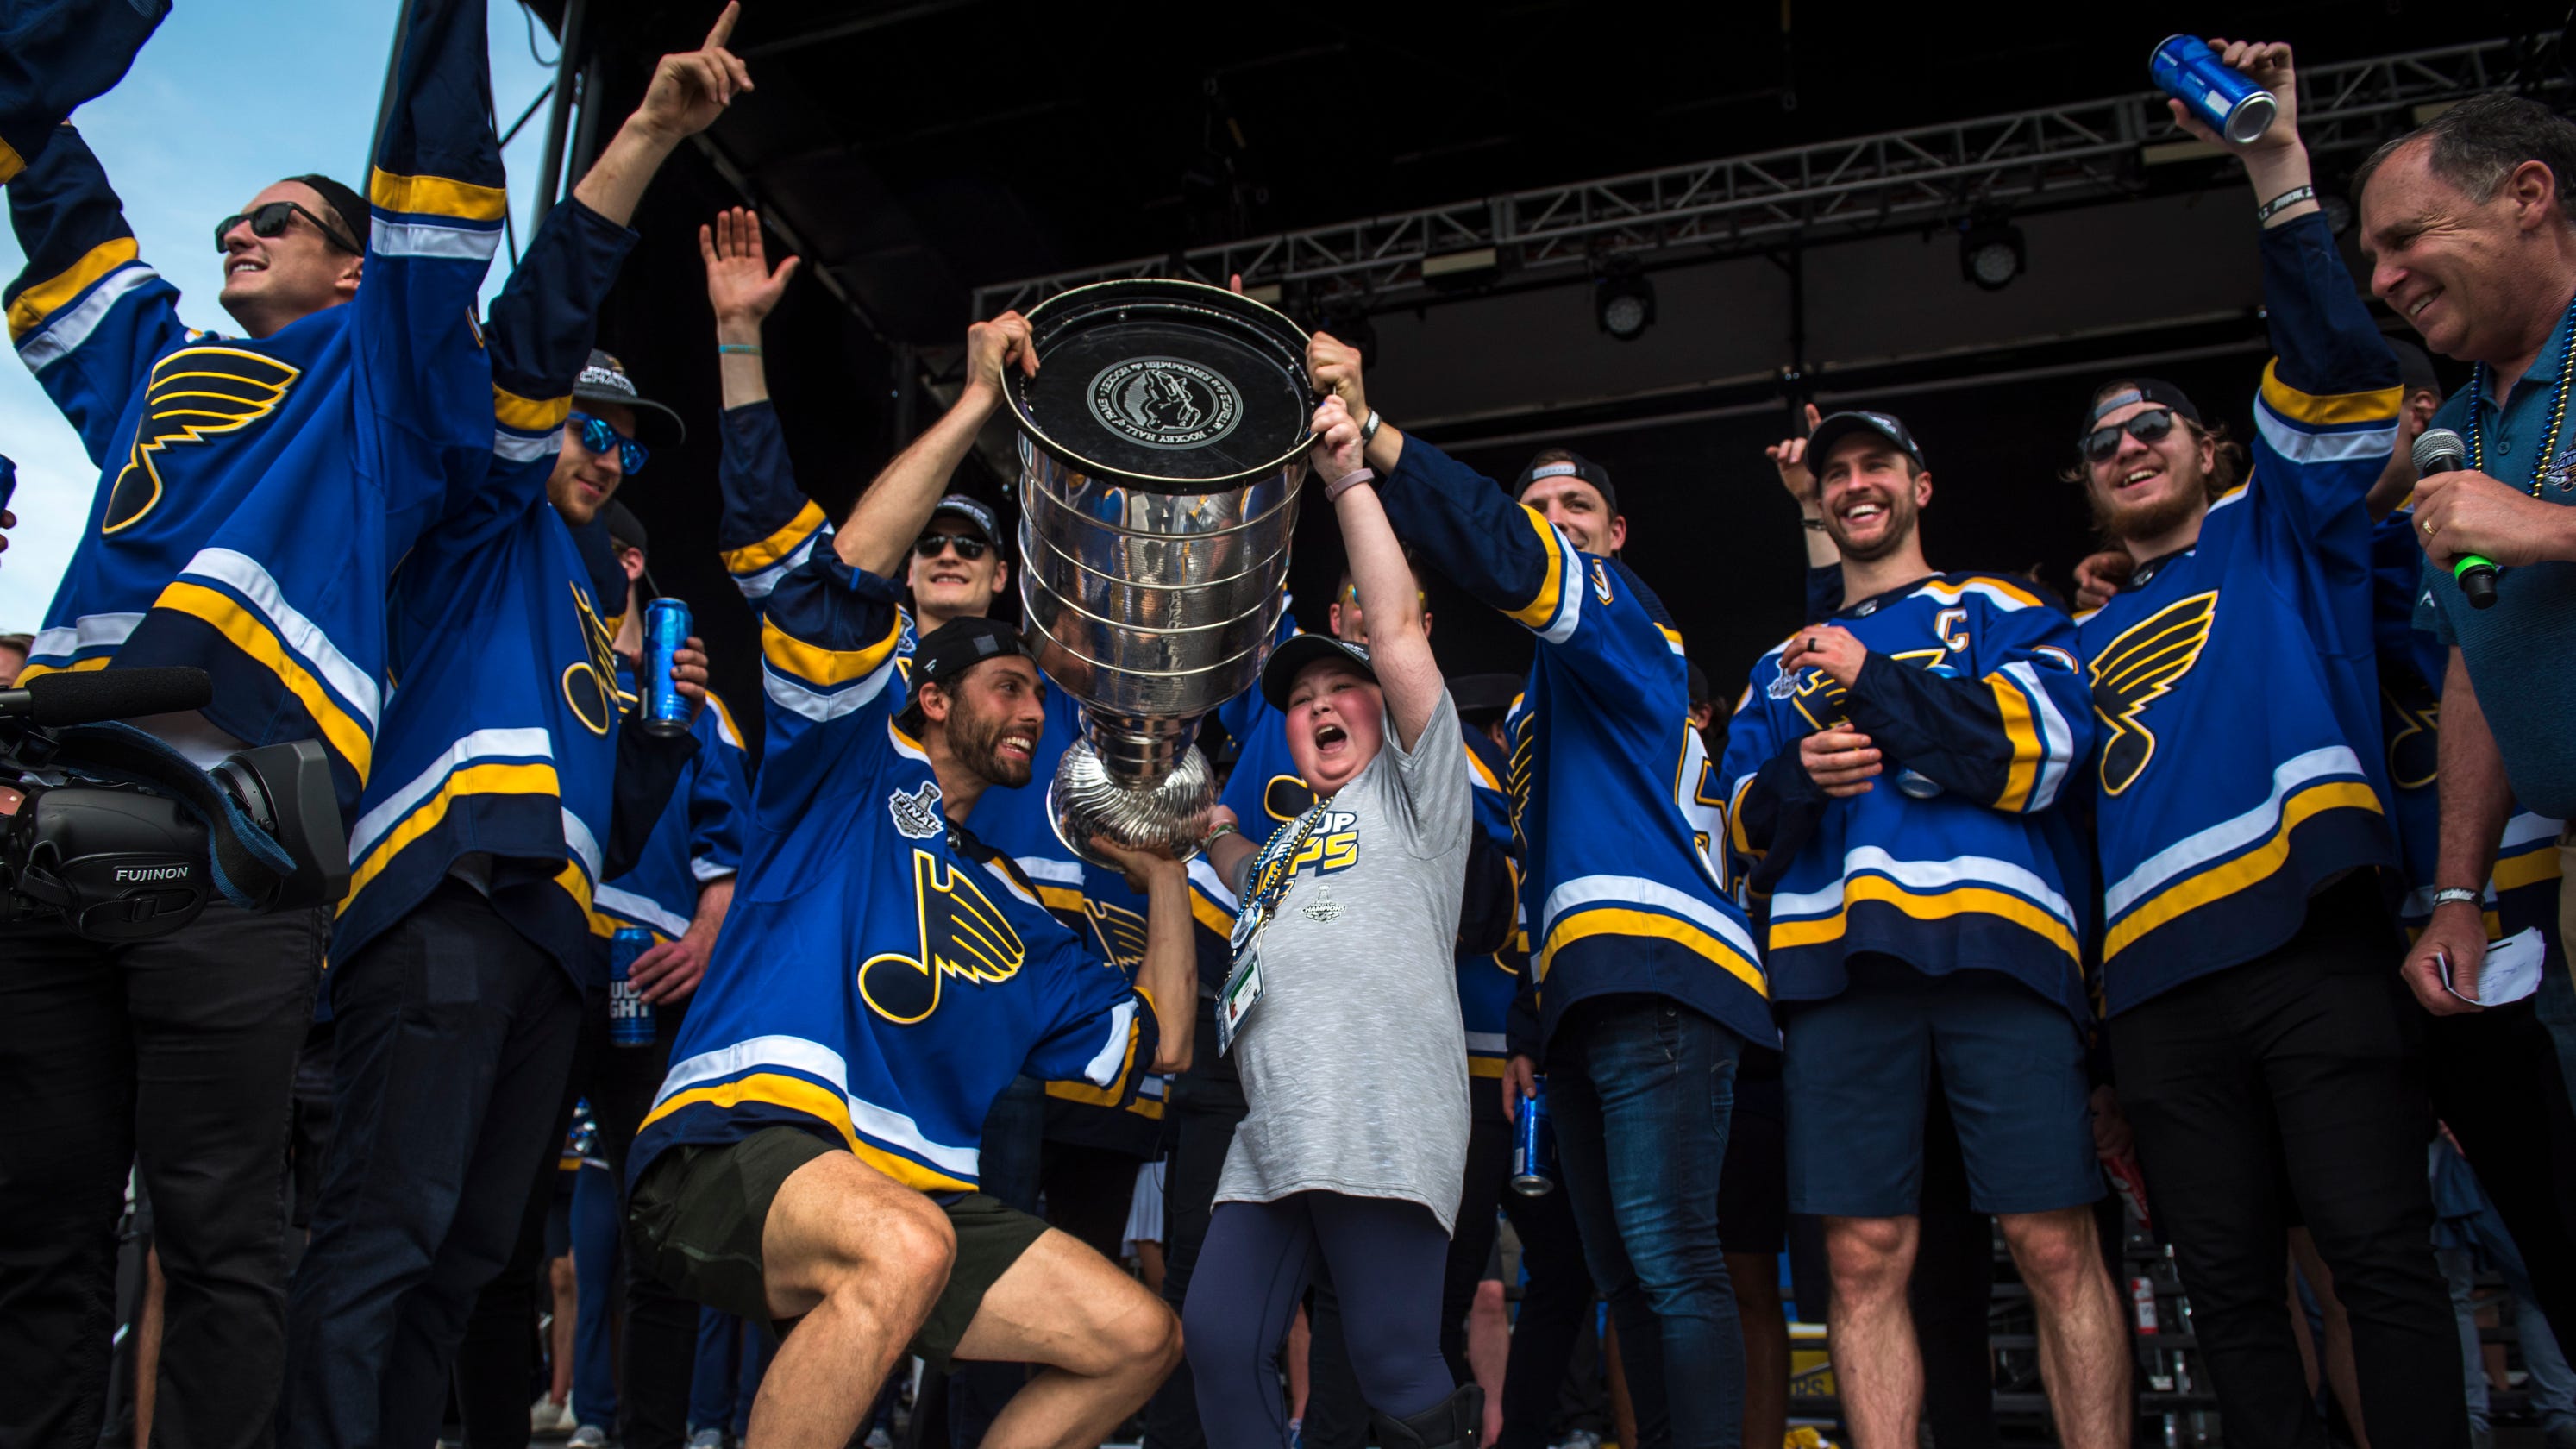 Laila Anderson, St. Louis Blues superfan, given Stanley Cup ring